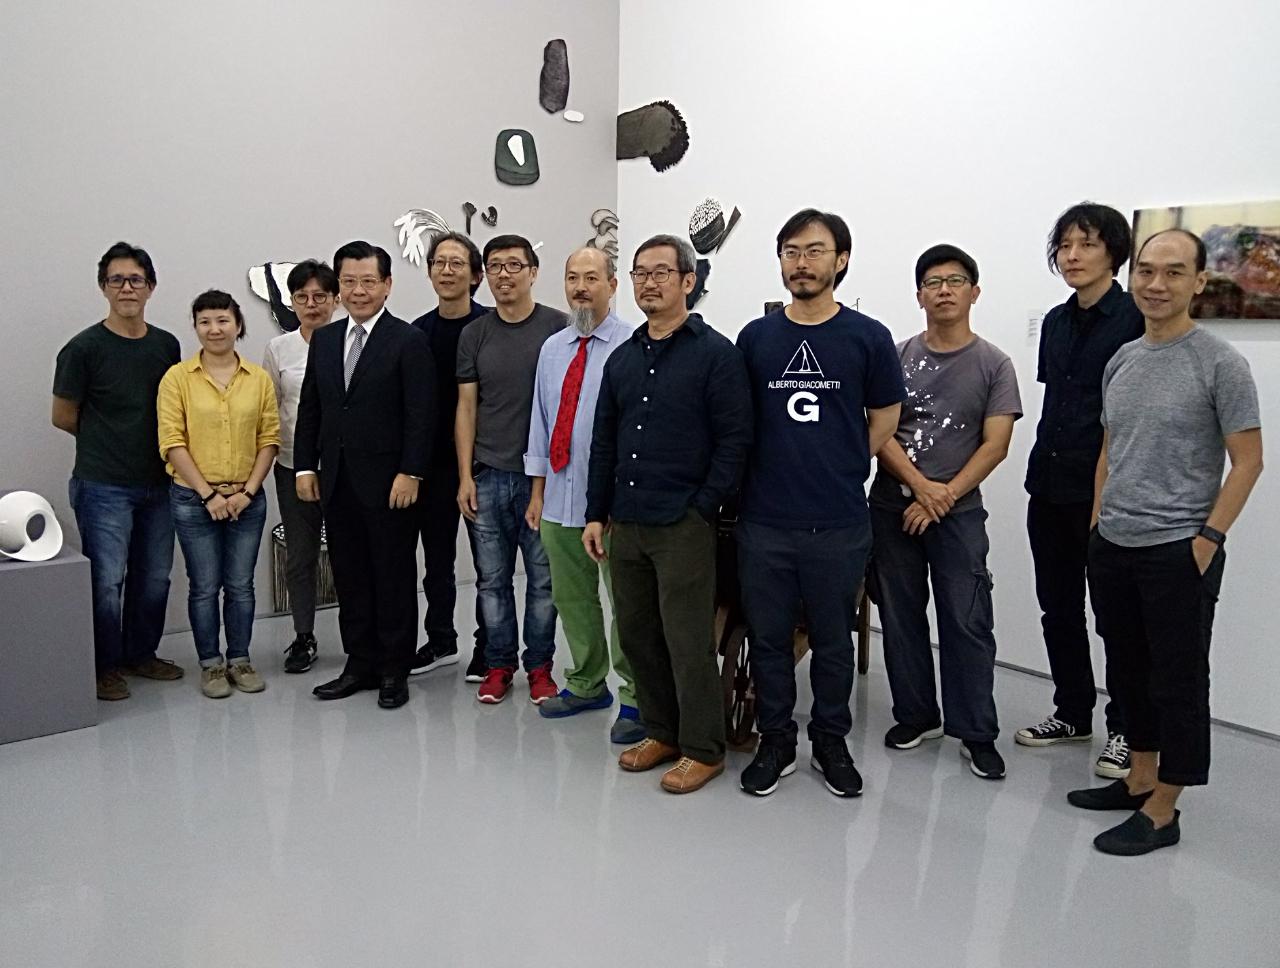 Representative Francis Liang (fourth from left) in a group photo with participating artists of the “Motionless Boundary: Singapore-Taiwan Art Exchange Exhibition”. (7th July 2018)